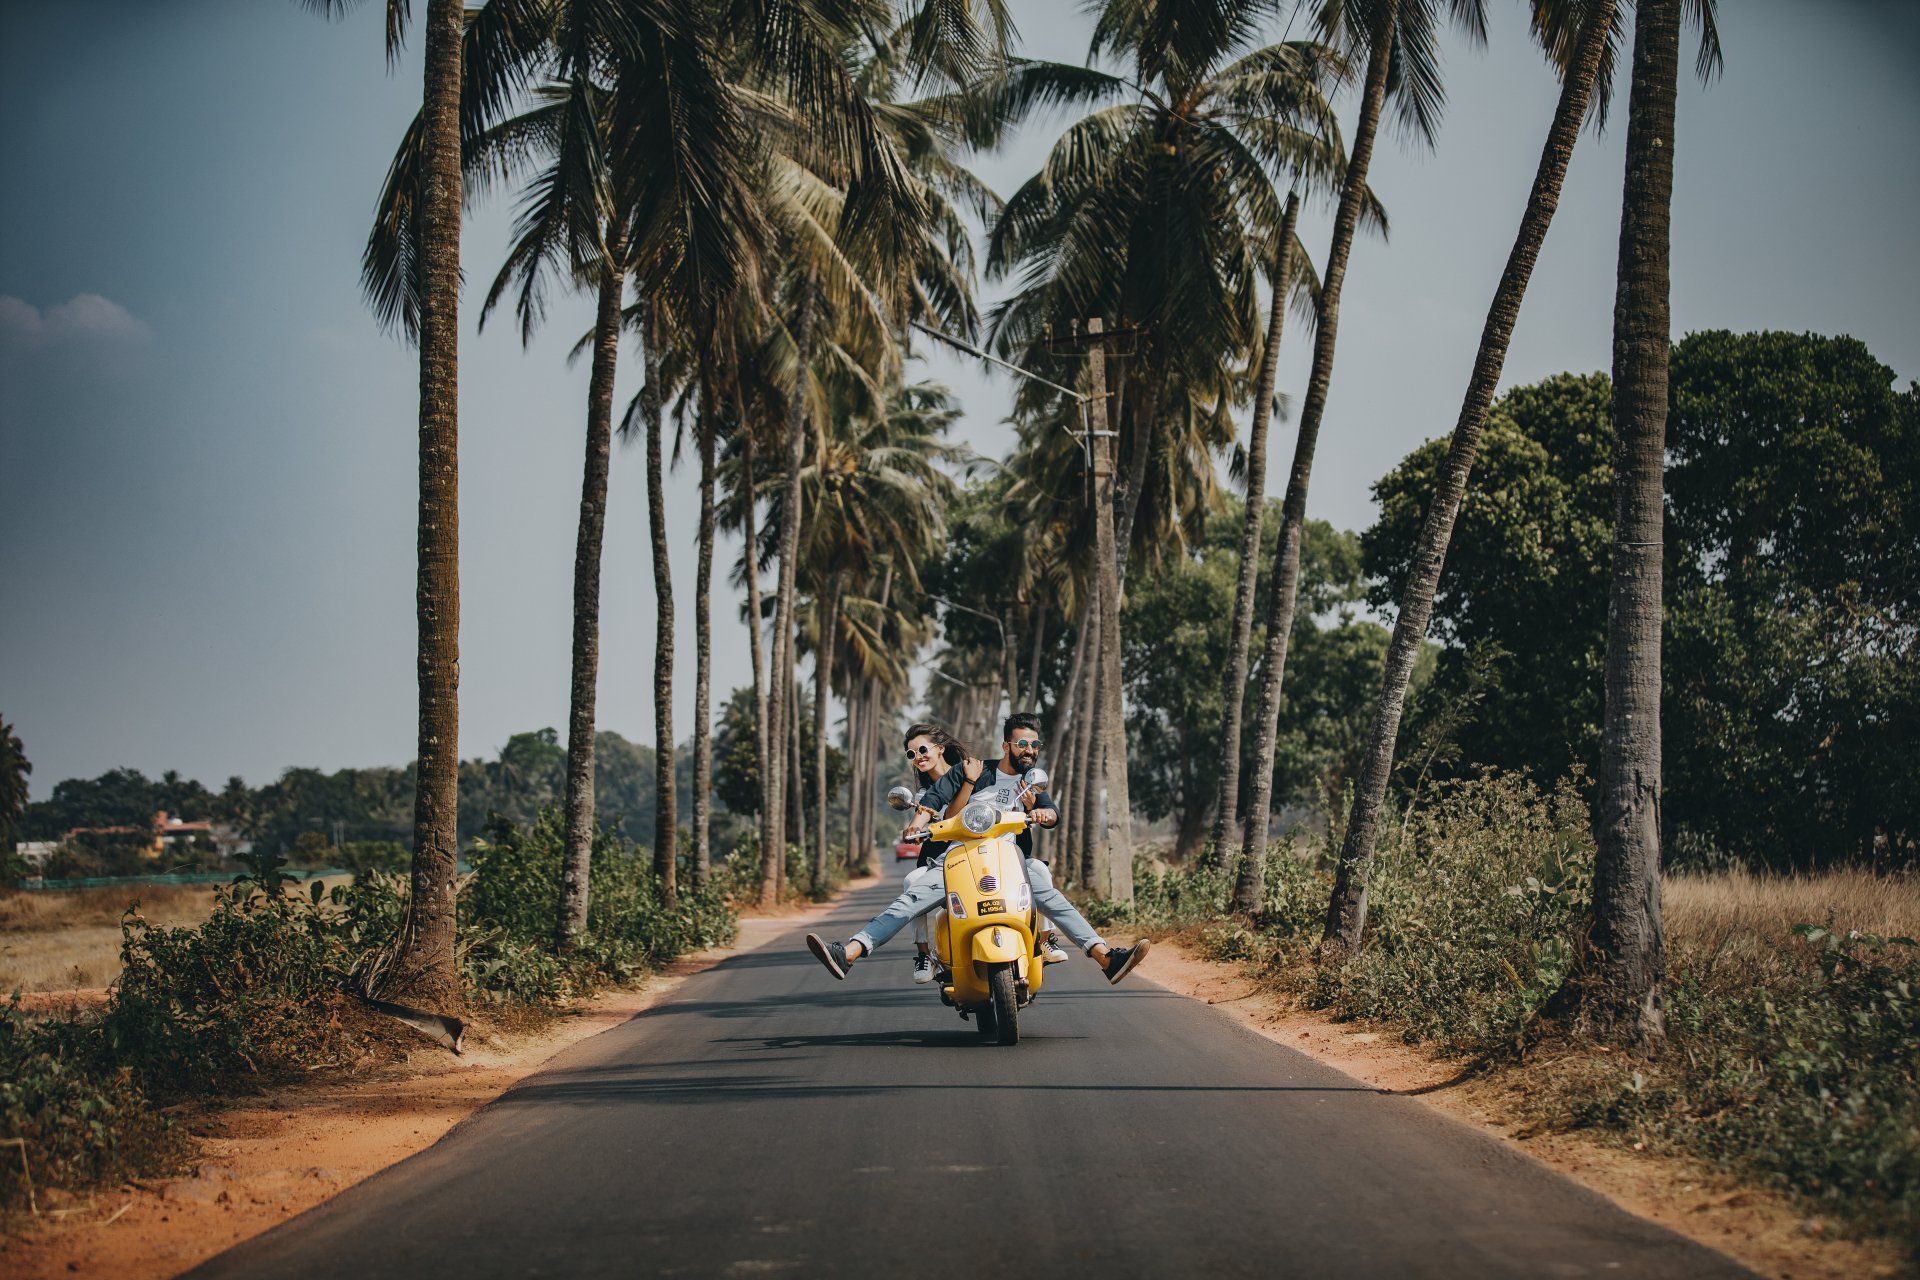 A group of people are riding a scooter down a road surrounded by palm trees.